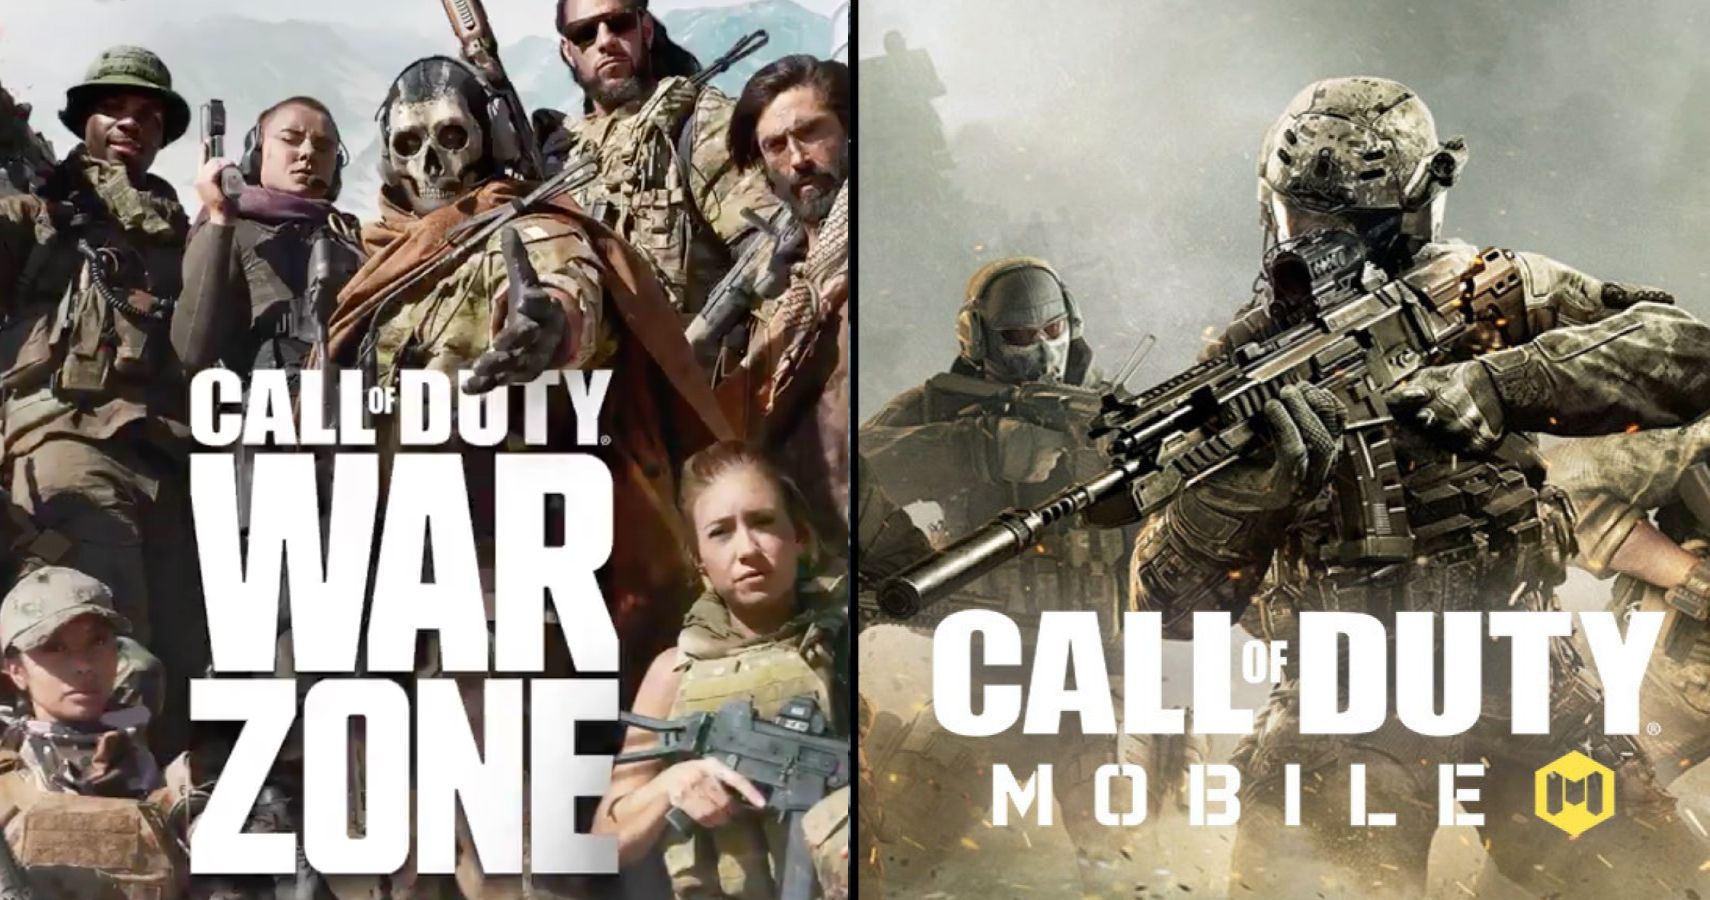 Call Of Duty: Mobile Vs Call Of Duty: Warzone - Which Free Game Is Better?